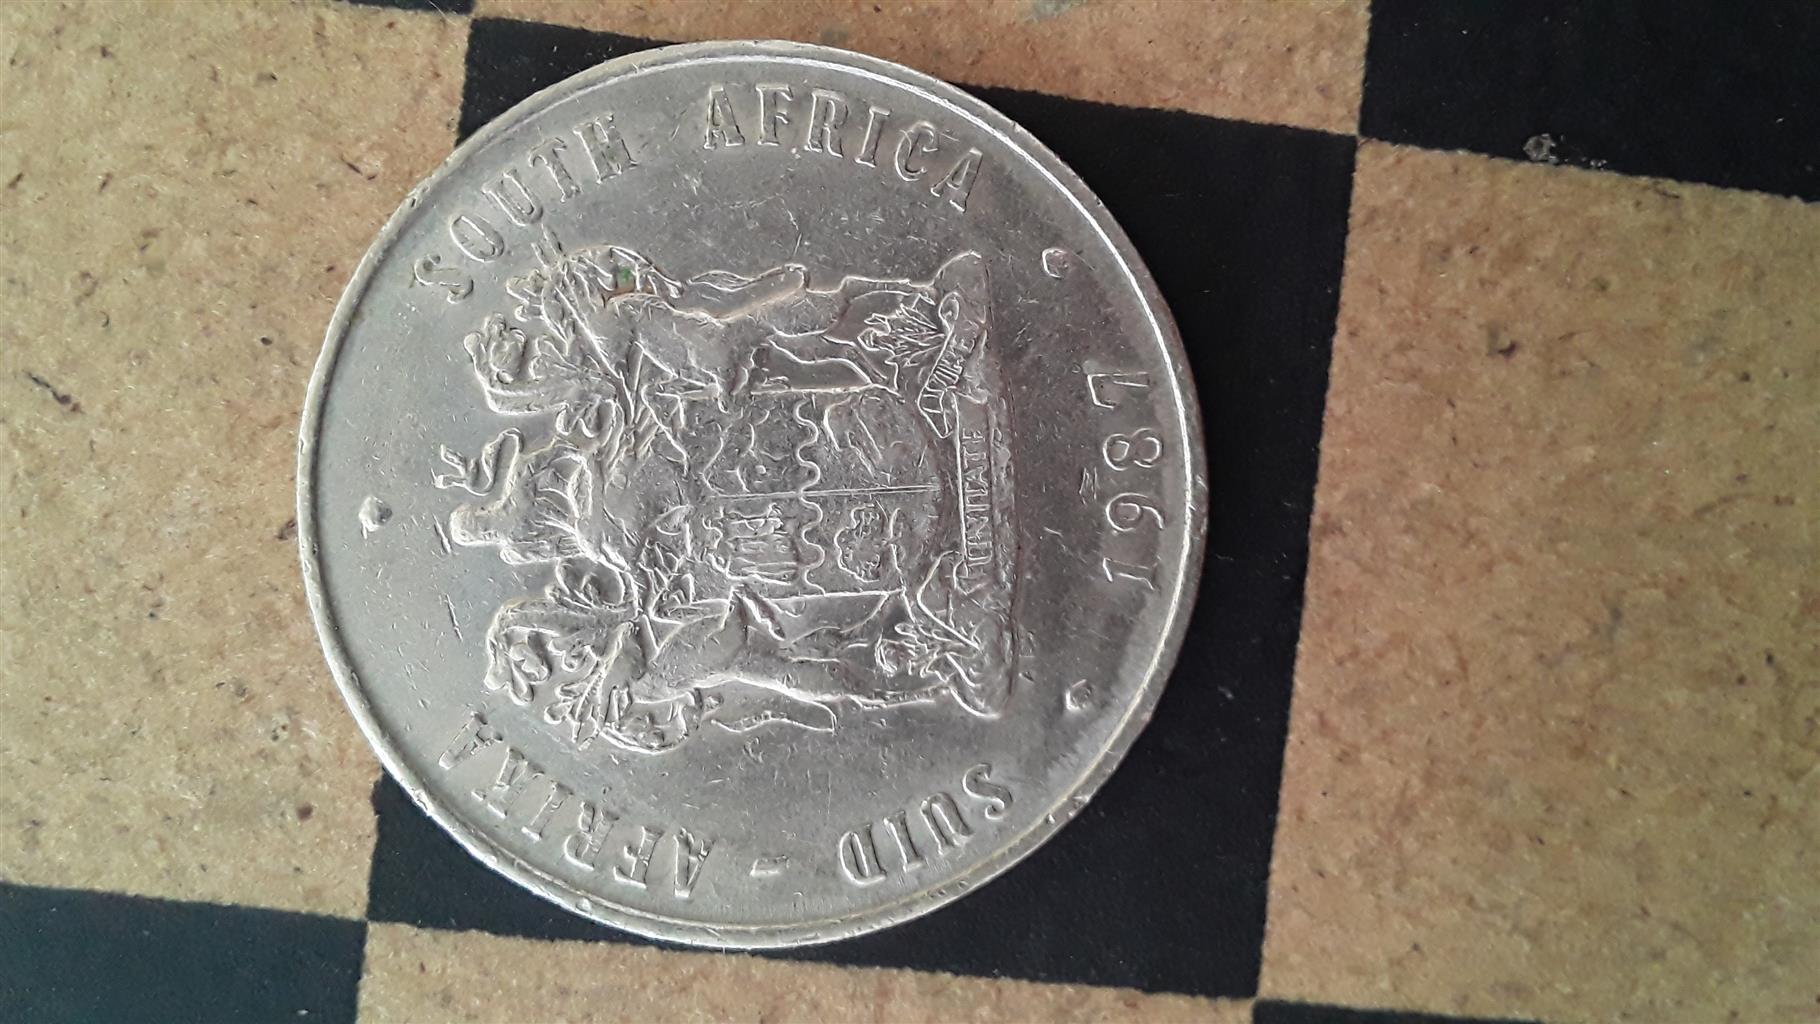 SOLI DEO GLORIA 1987 South Africa R1 coin